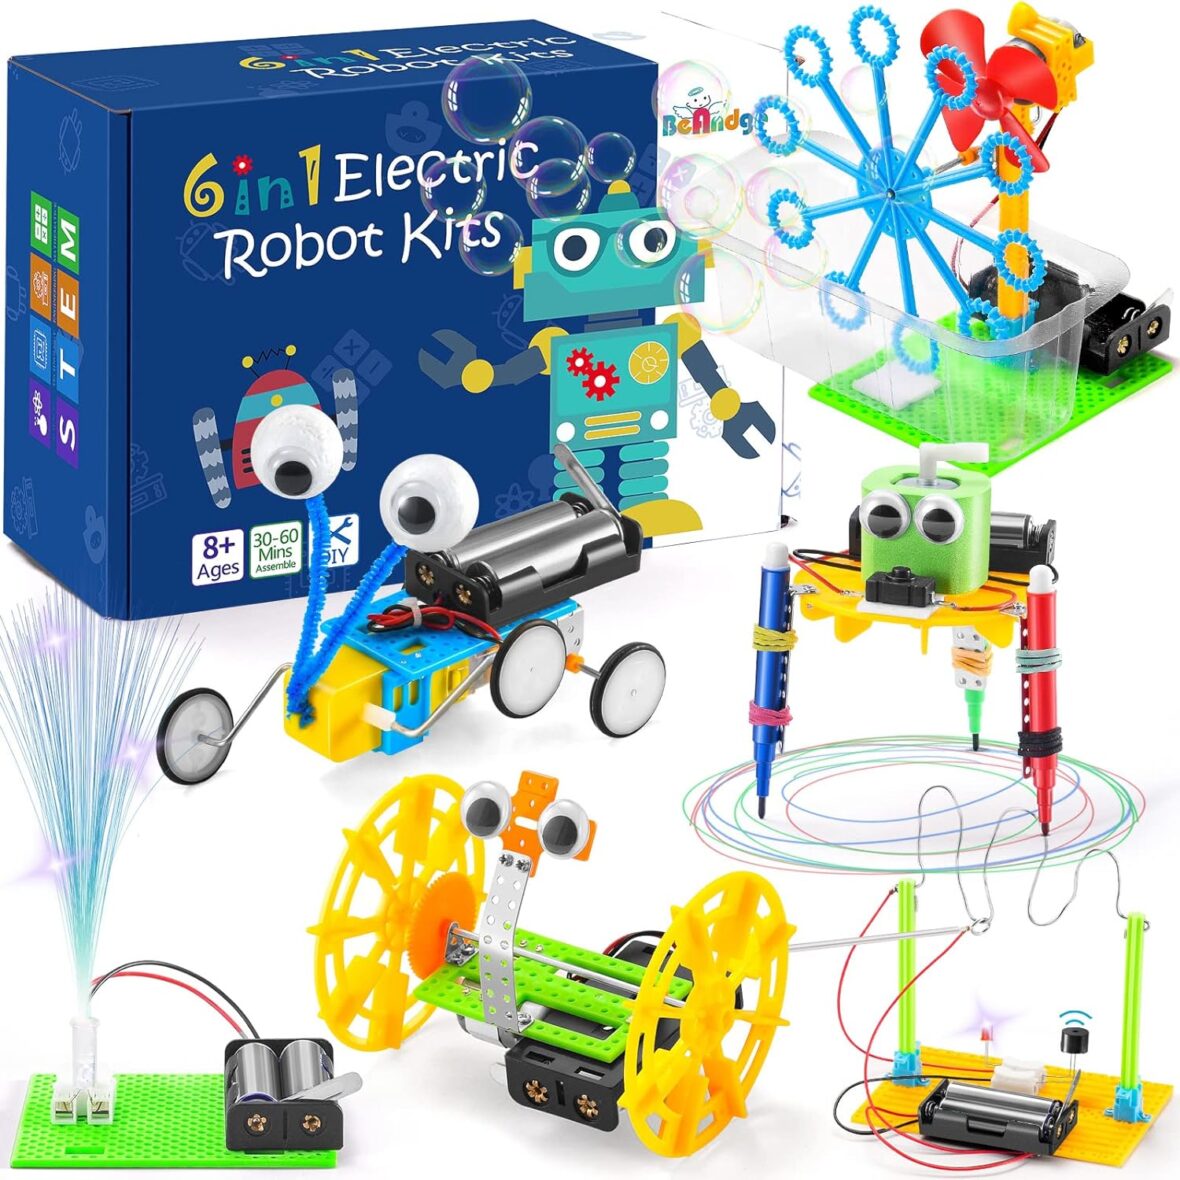 STEM Robotics Kit, 6 Set Electronic Science Projects Experiments for Kids Ages 8-12 6-8, STEM Toys for Boys, DIY Engineering Build Robot Building Kits